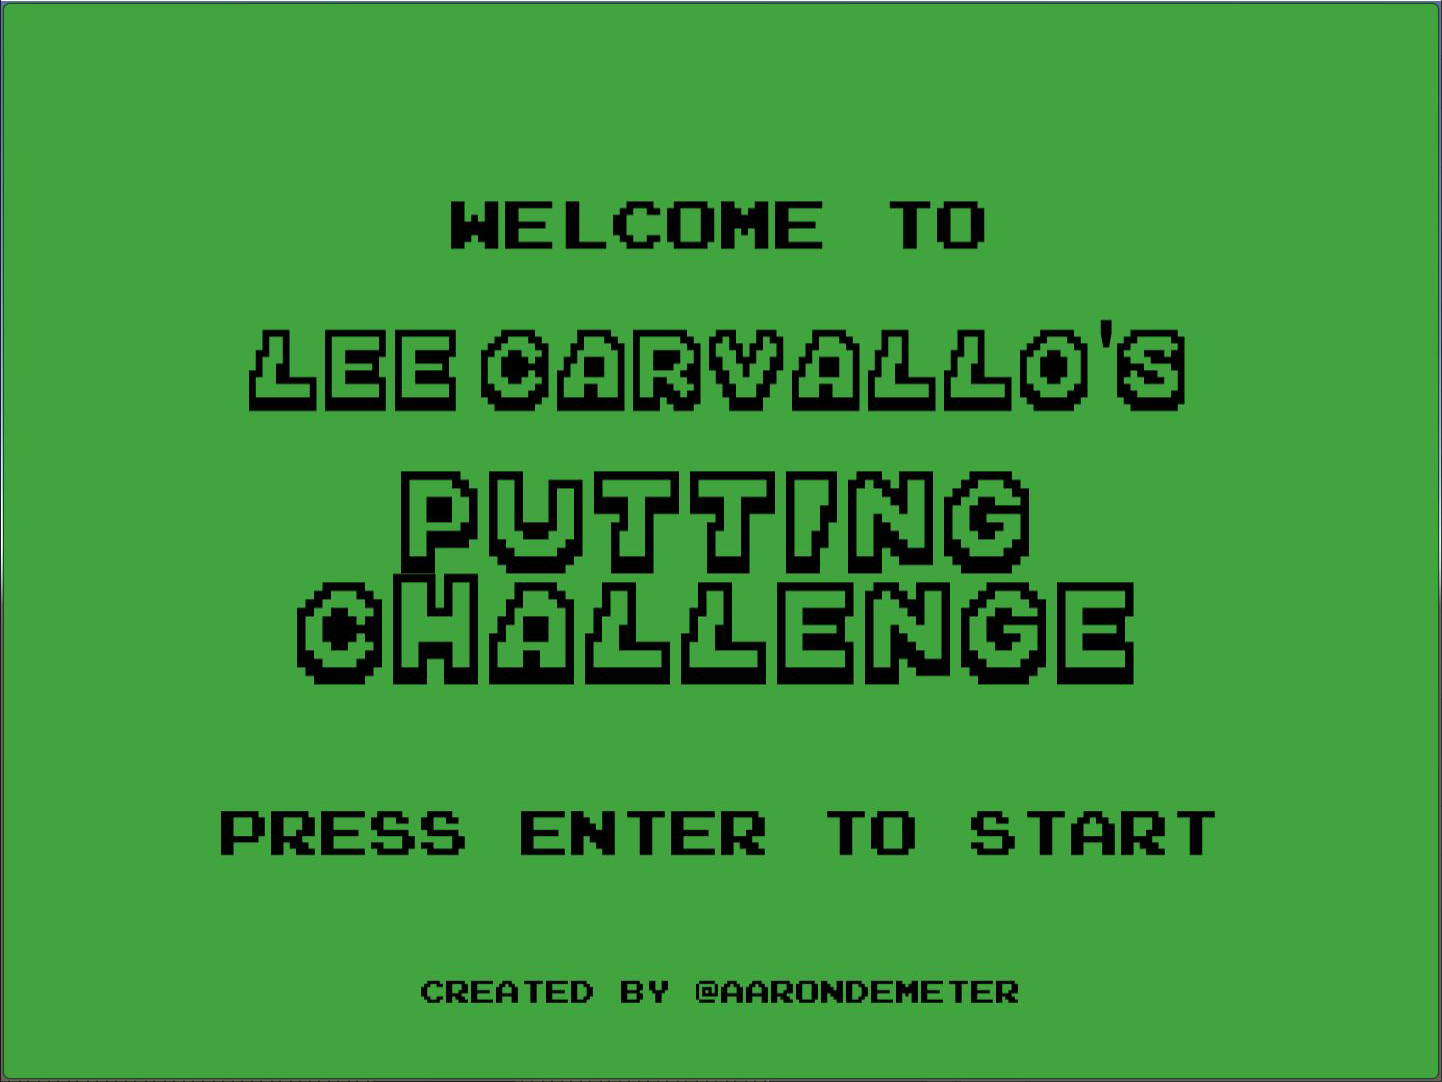 Lee Carvallo's Putting Challenge by Aaron Demeter